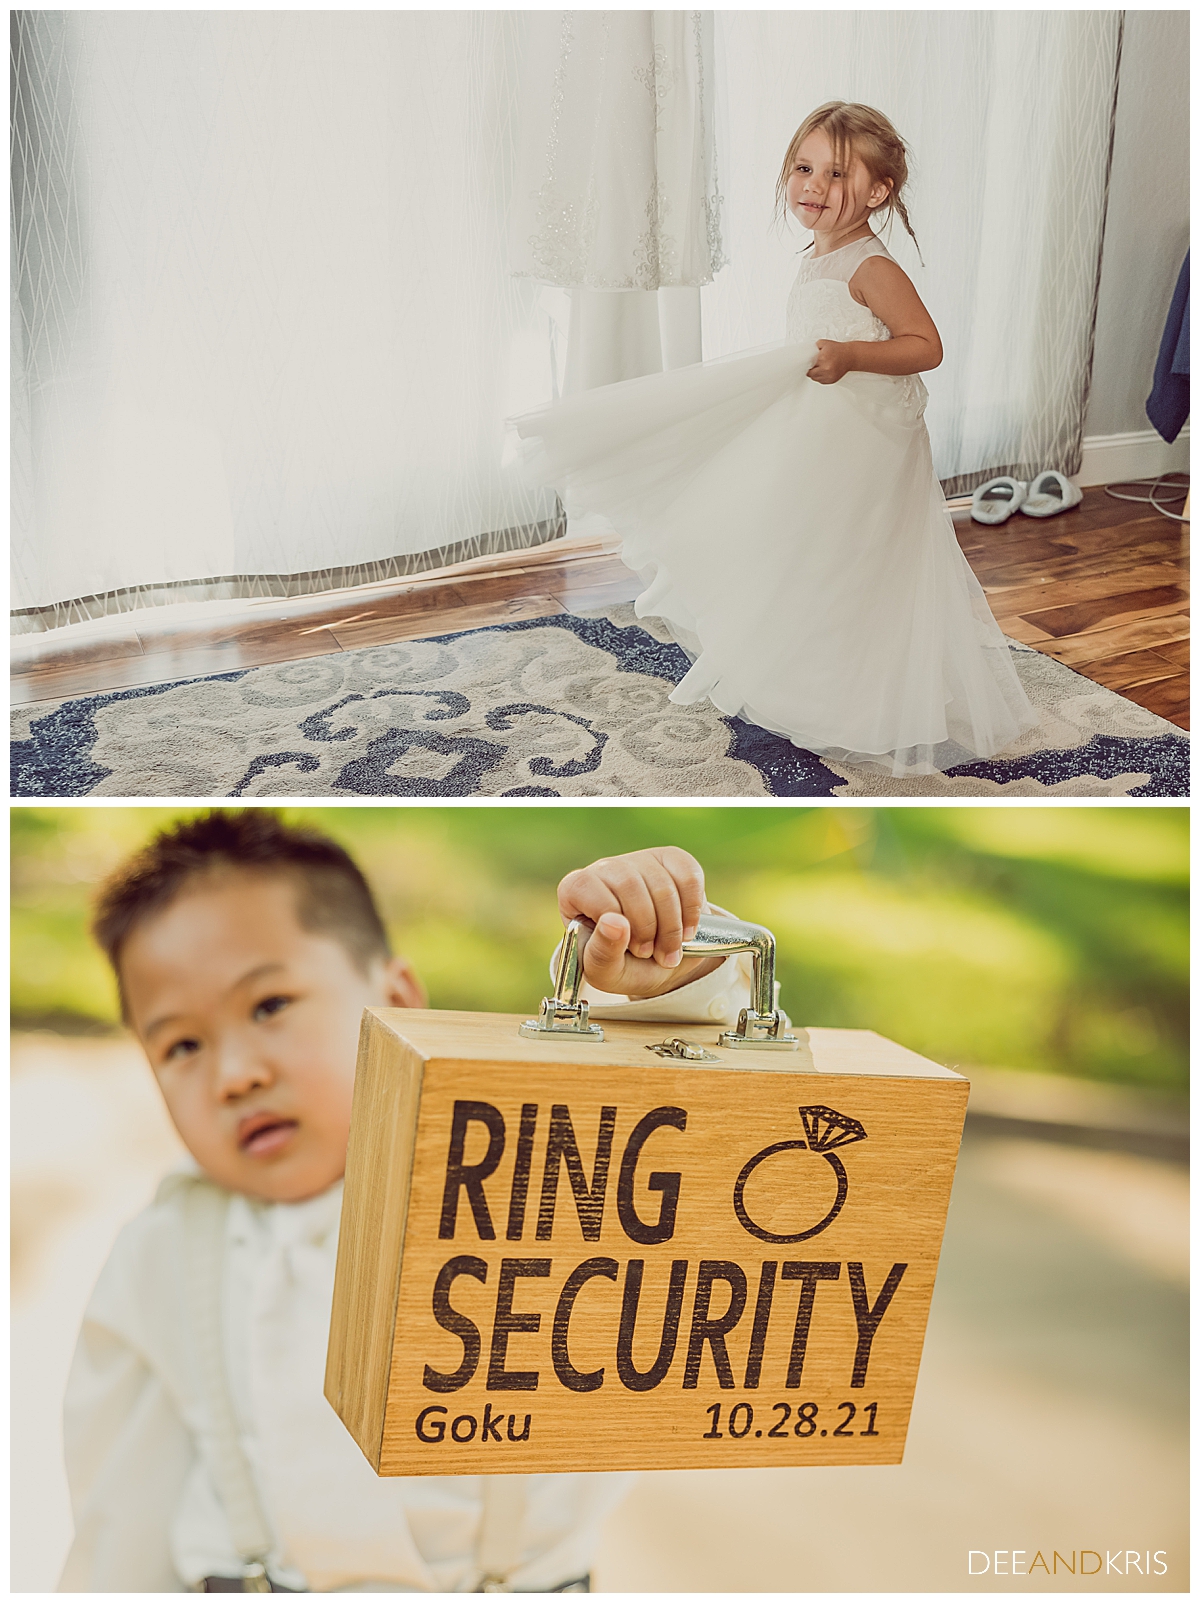 Two color images: Top image of flower girl twirling in her dress. Bottom image of Ring Bearer holding "ring security" case.